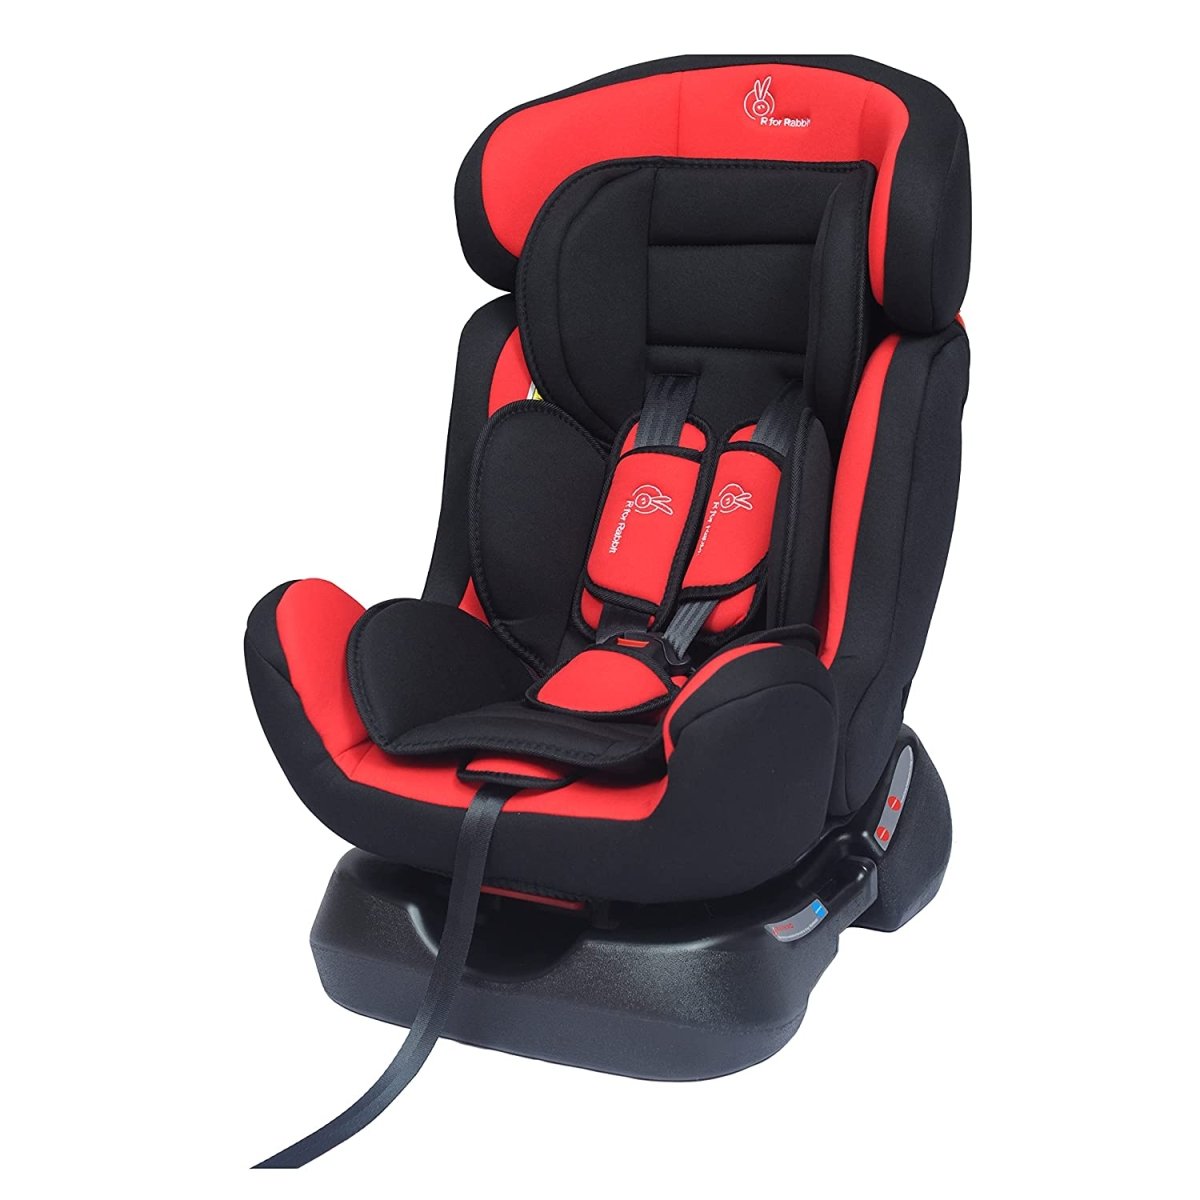 R for Rabbit Convertible Baby Car Seat Jack N Jill Grand- Red Black - CCJJRB3